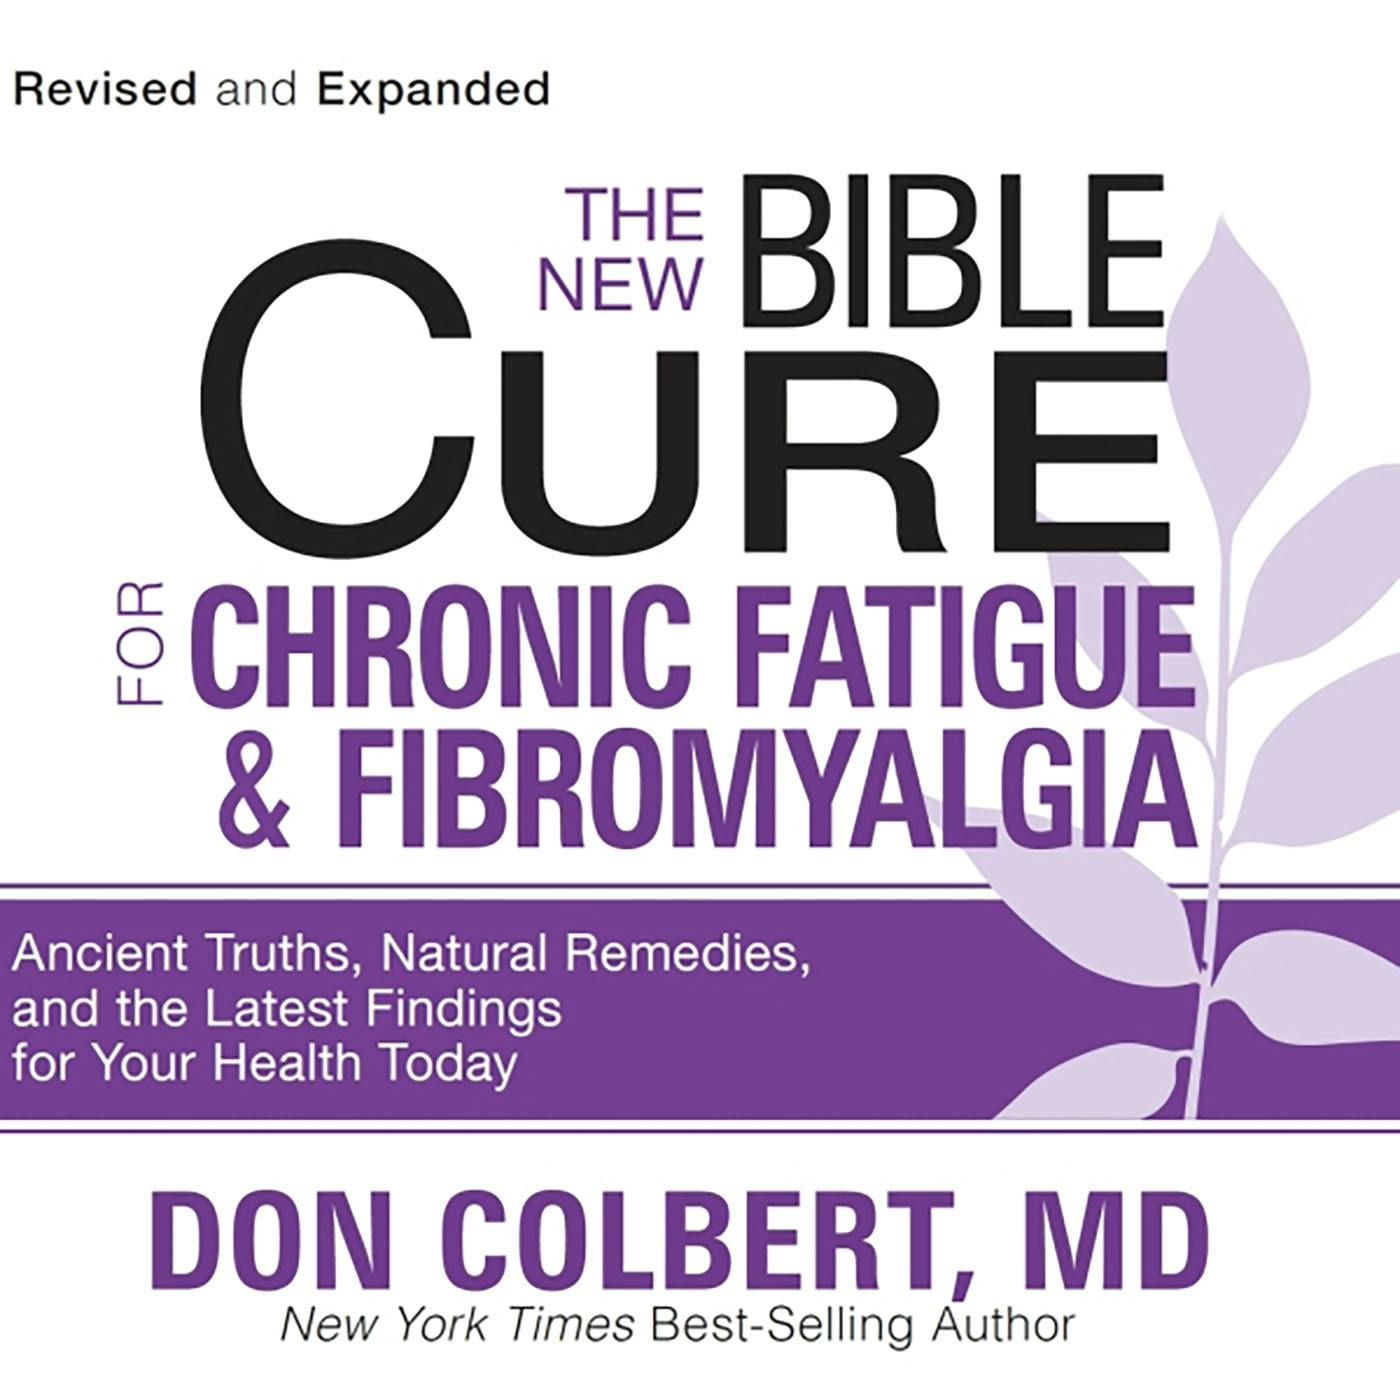 The New Bible Cure for Chronic Fatigue and Fibromyalgia: Ancient Truths, Natural Remedies, and the Latest Findings for Your Health Today - undefined